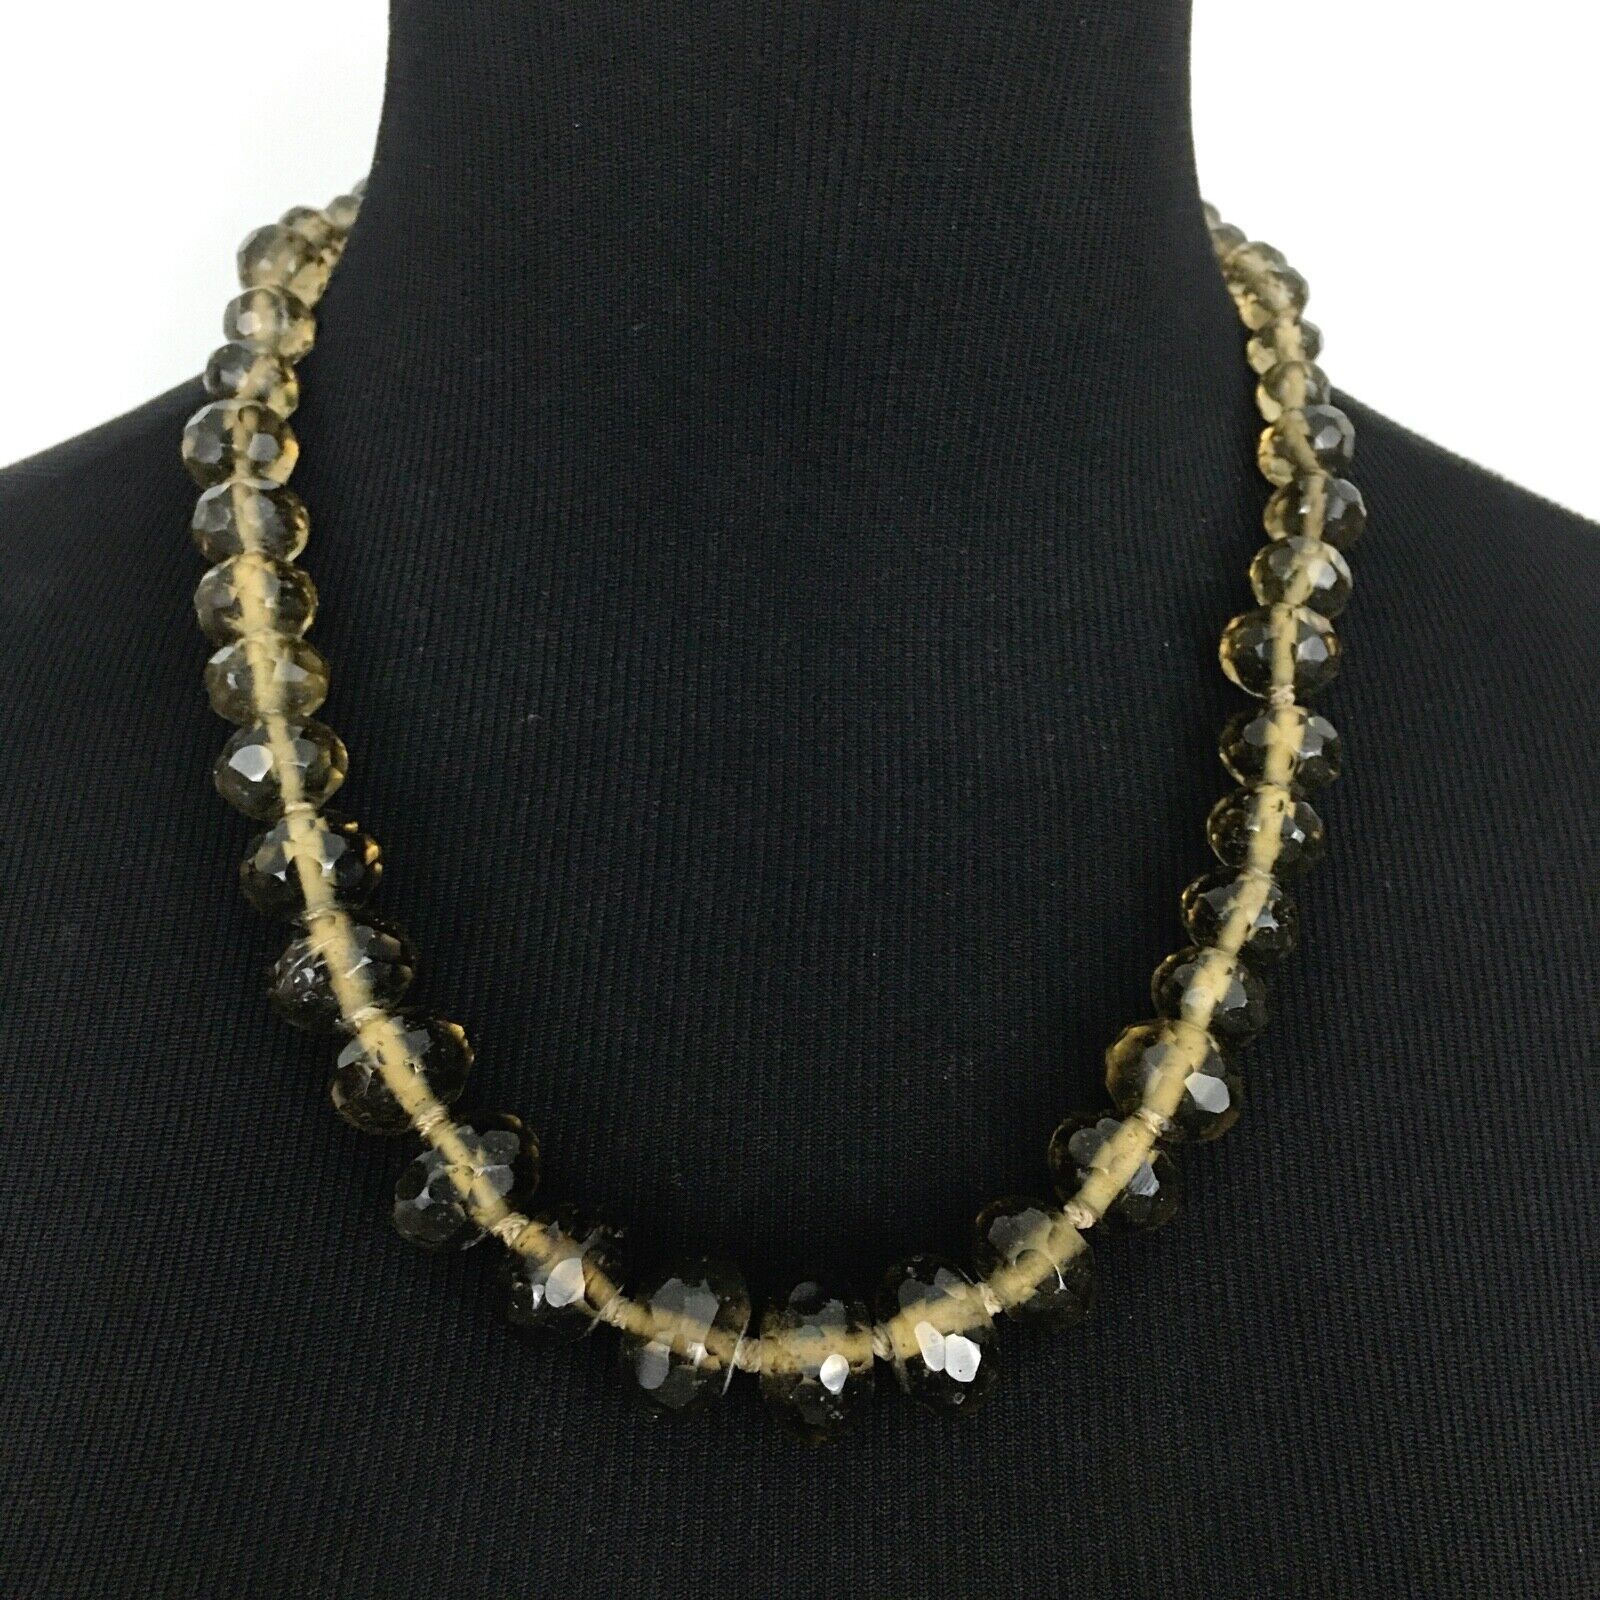 Primary image for TALBOTS graduated faceted bead necklace - brown crystal glass chunky strand 21"